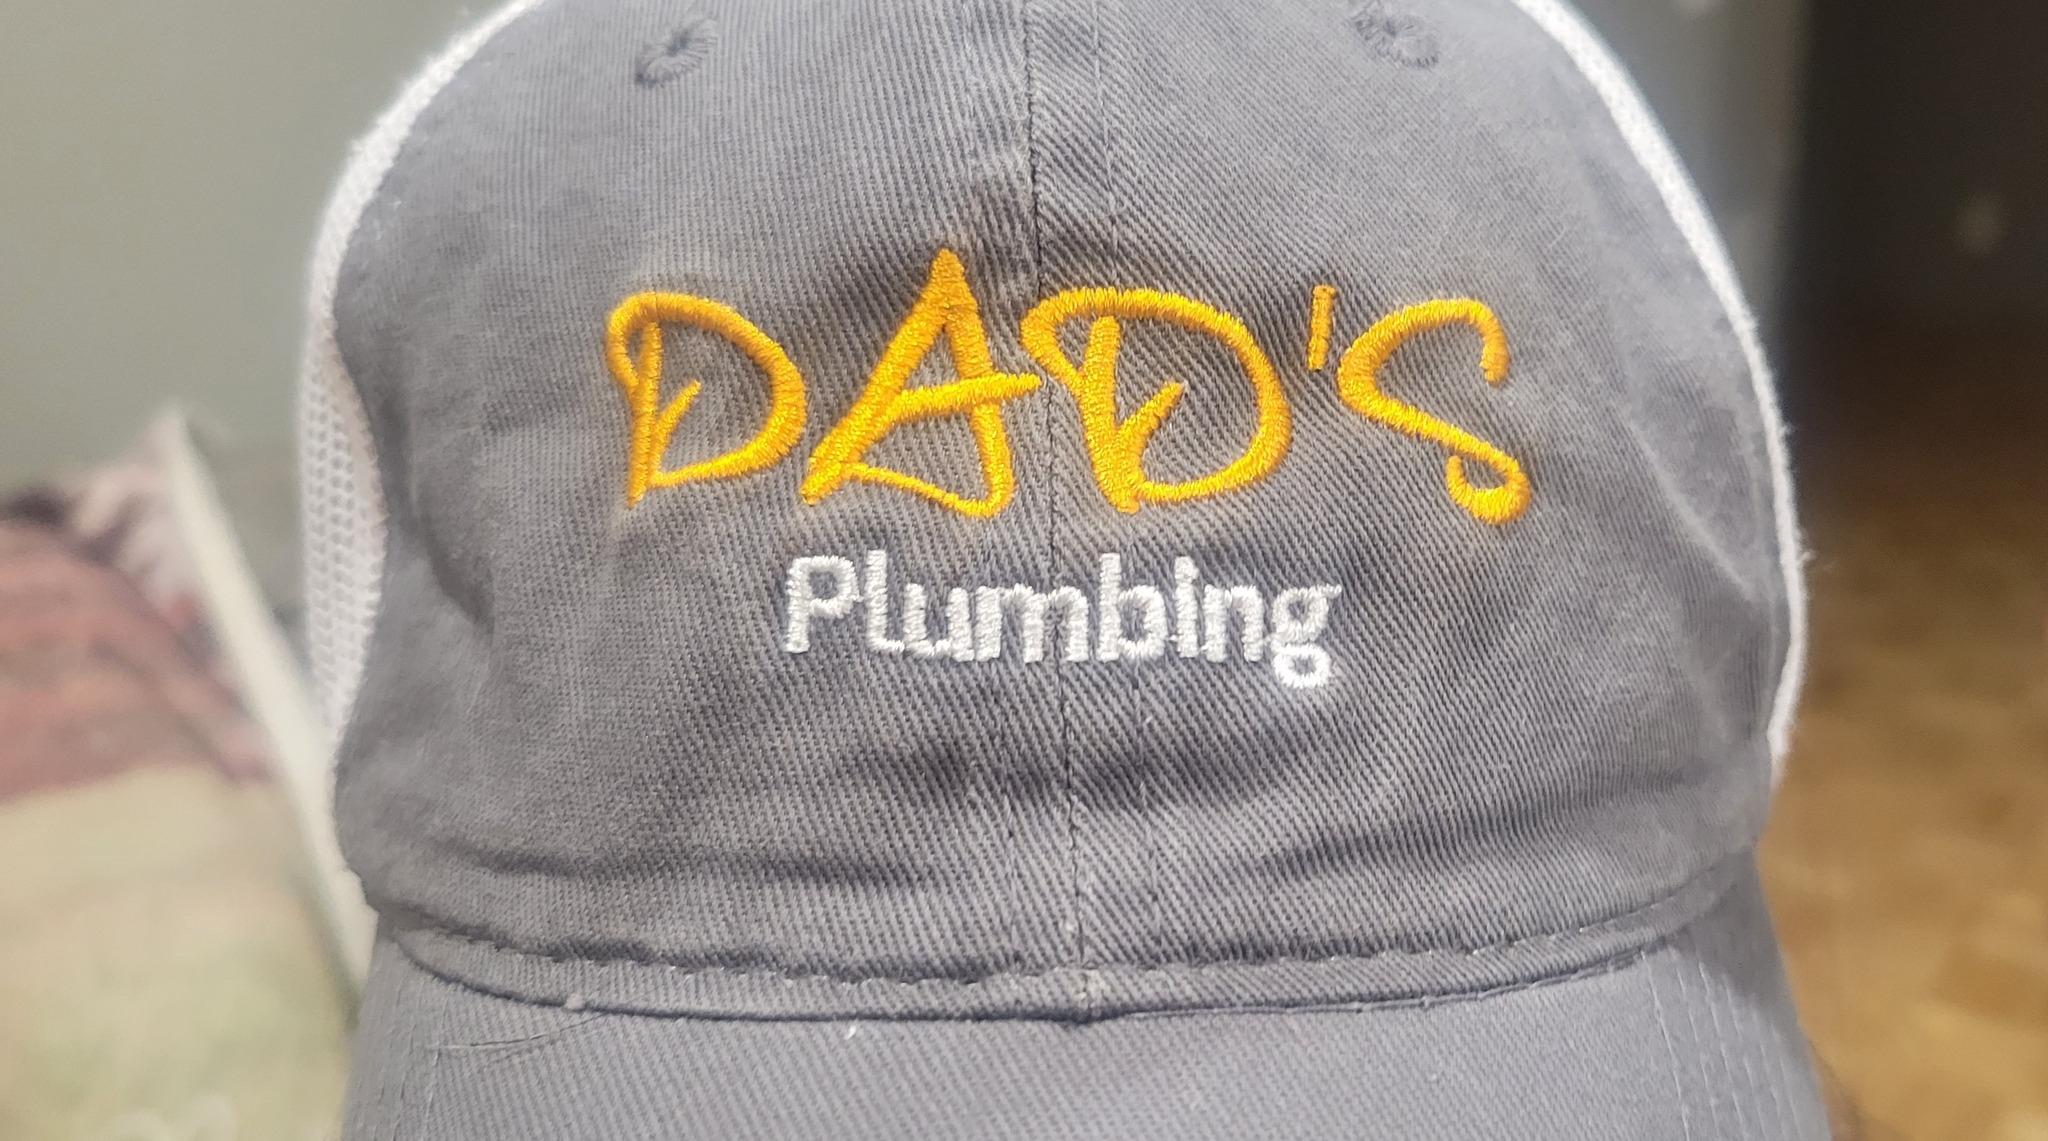 Dad's Plumbing: A Testament to Family Values and Entrepreneurial Spirit in Murfreesboro